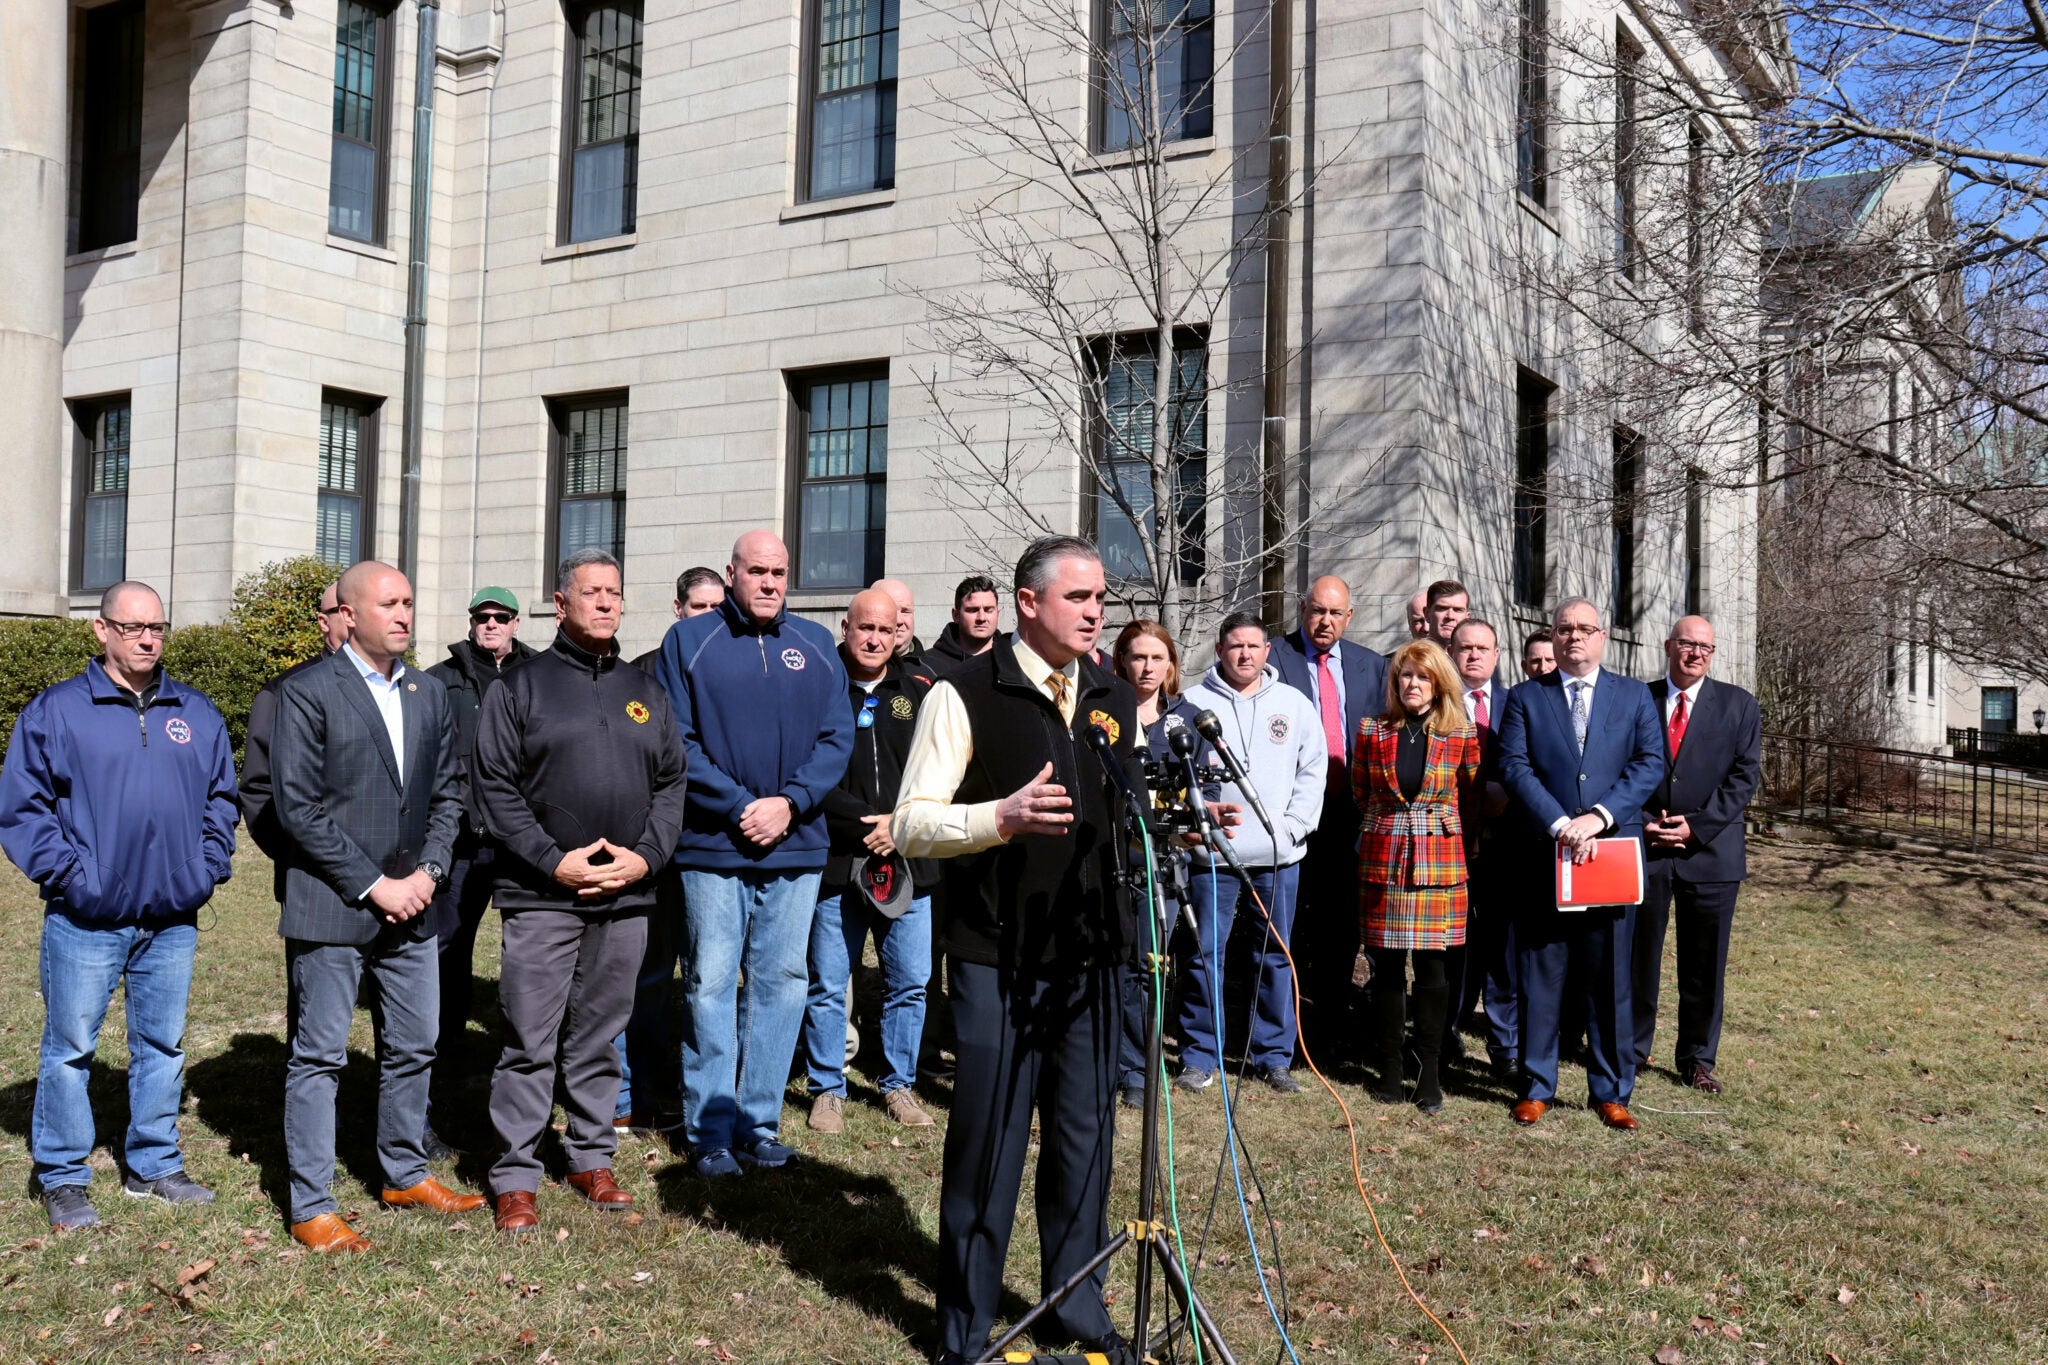 International Association of Firefighters General President, Edward Kelly, stands in front of a group of IAFF representatives in front of a white building